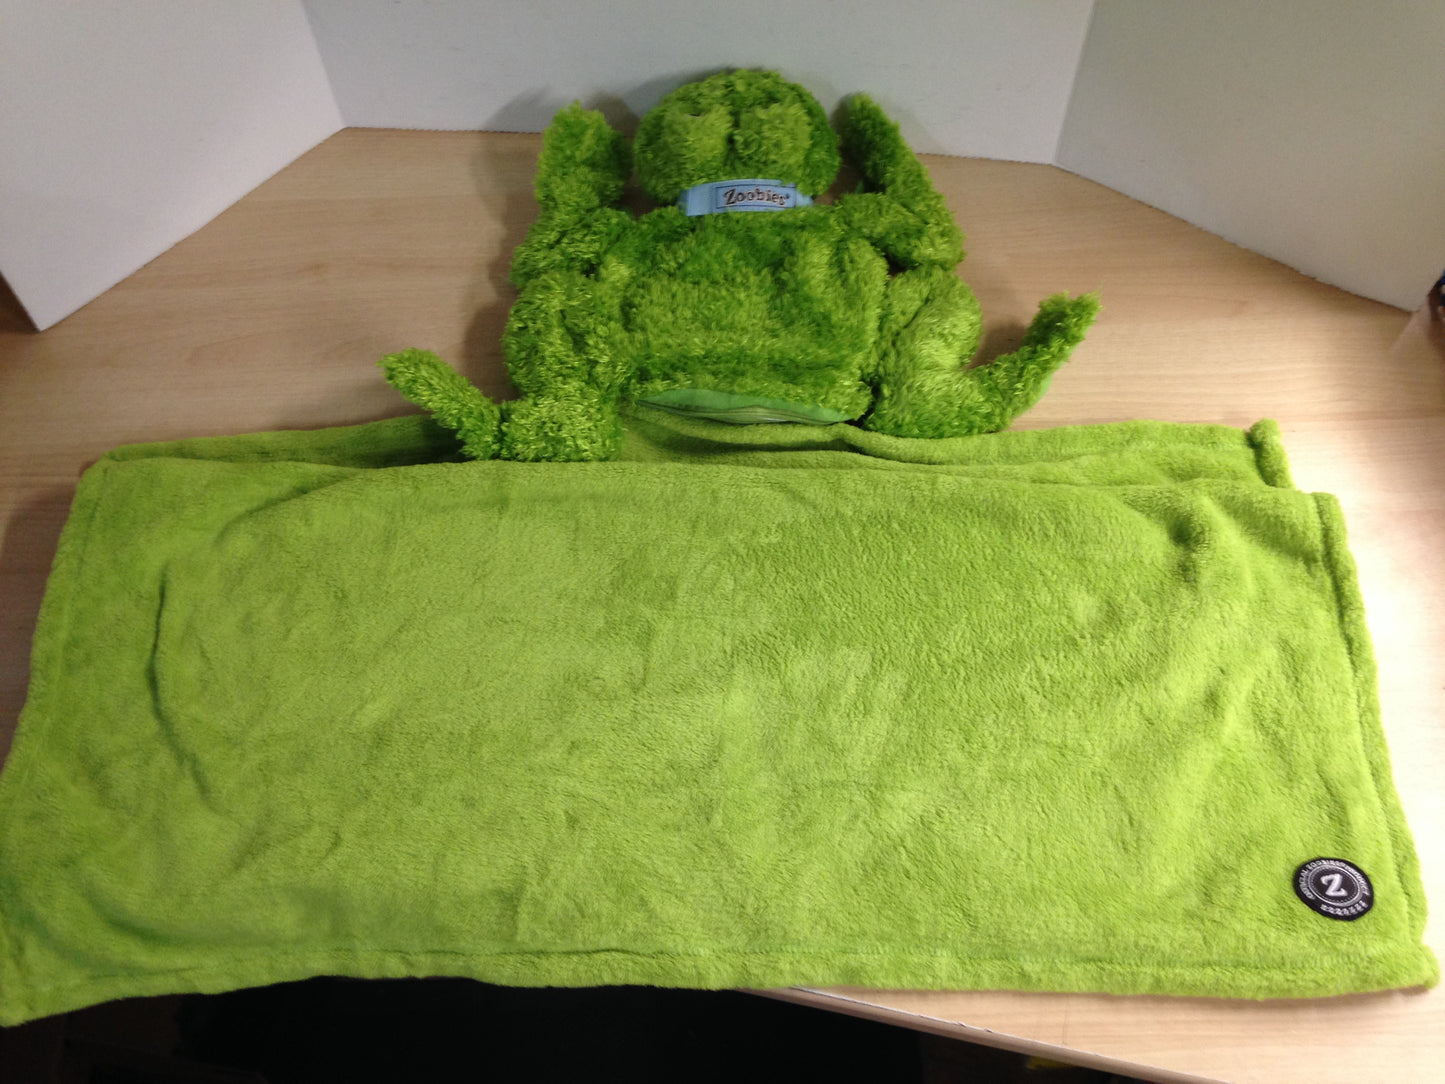 Blanket Pets Zoobies Flavio The Frog AnimalPillow With Large Comfy Blanket 35 x 55 inch All In One As New